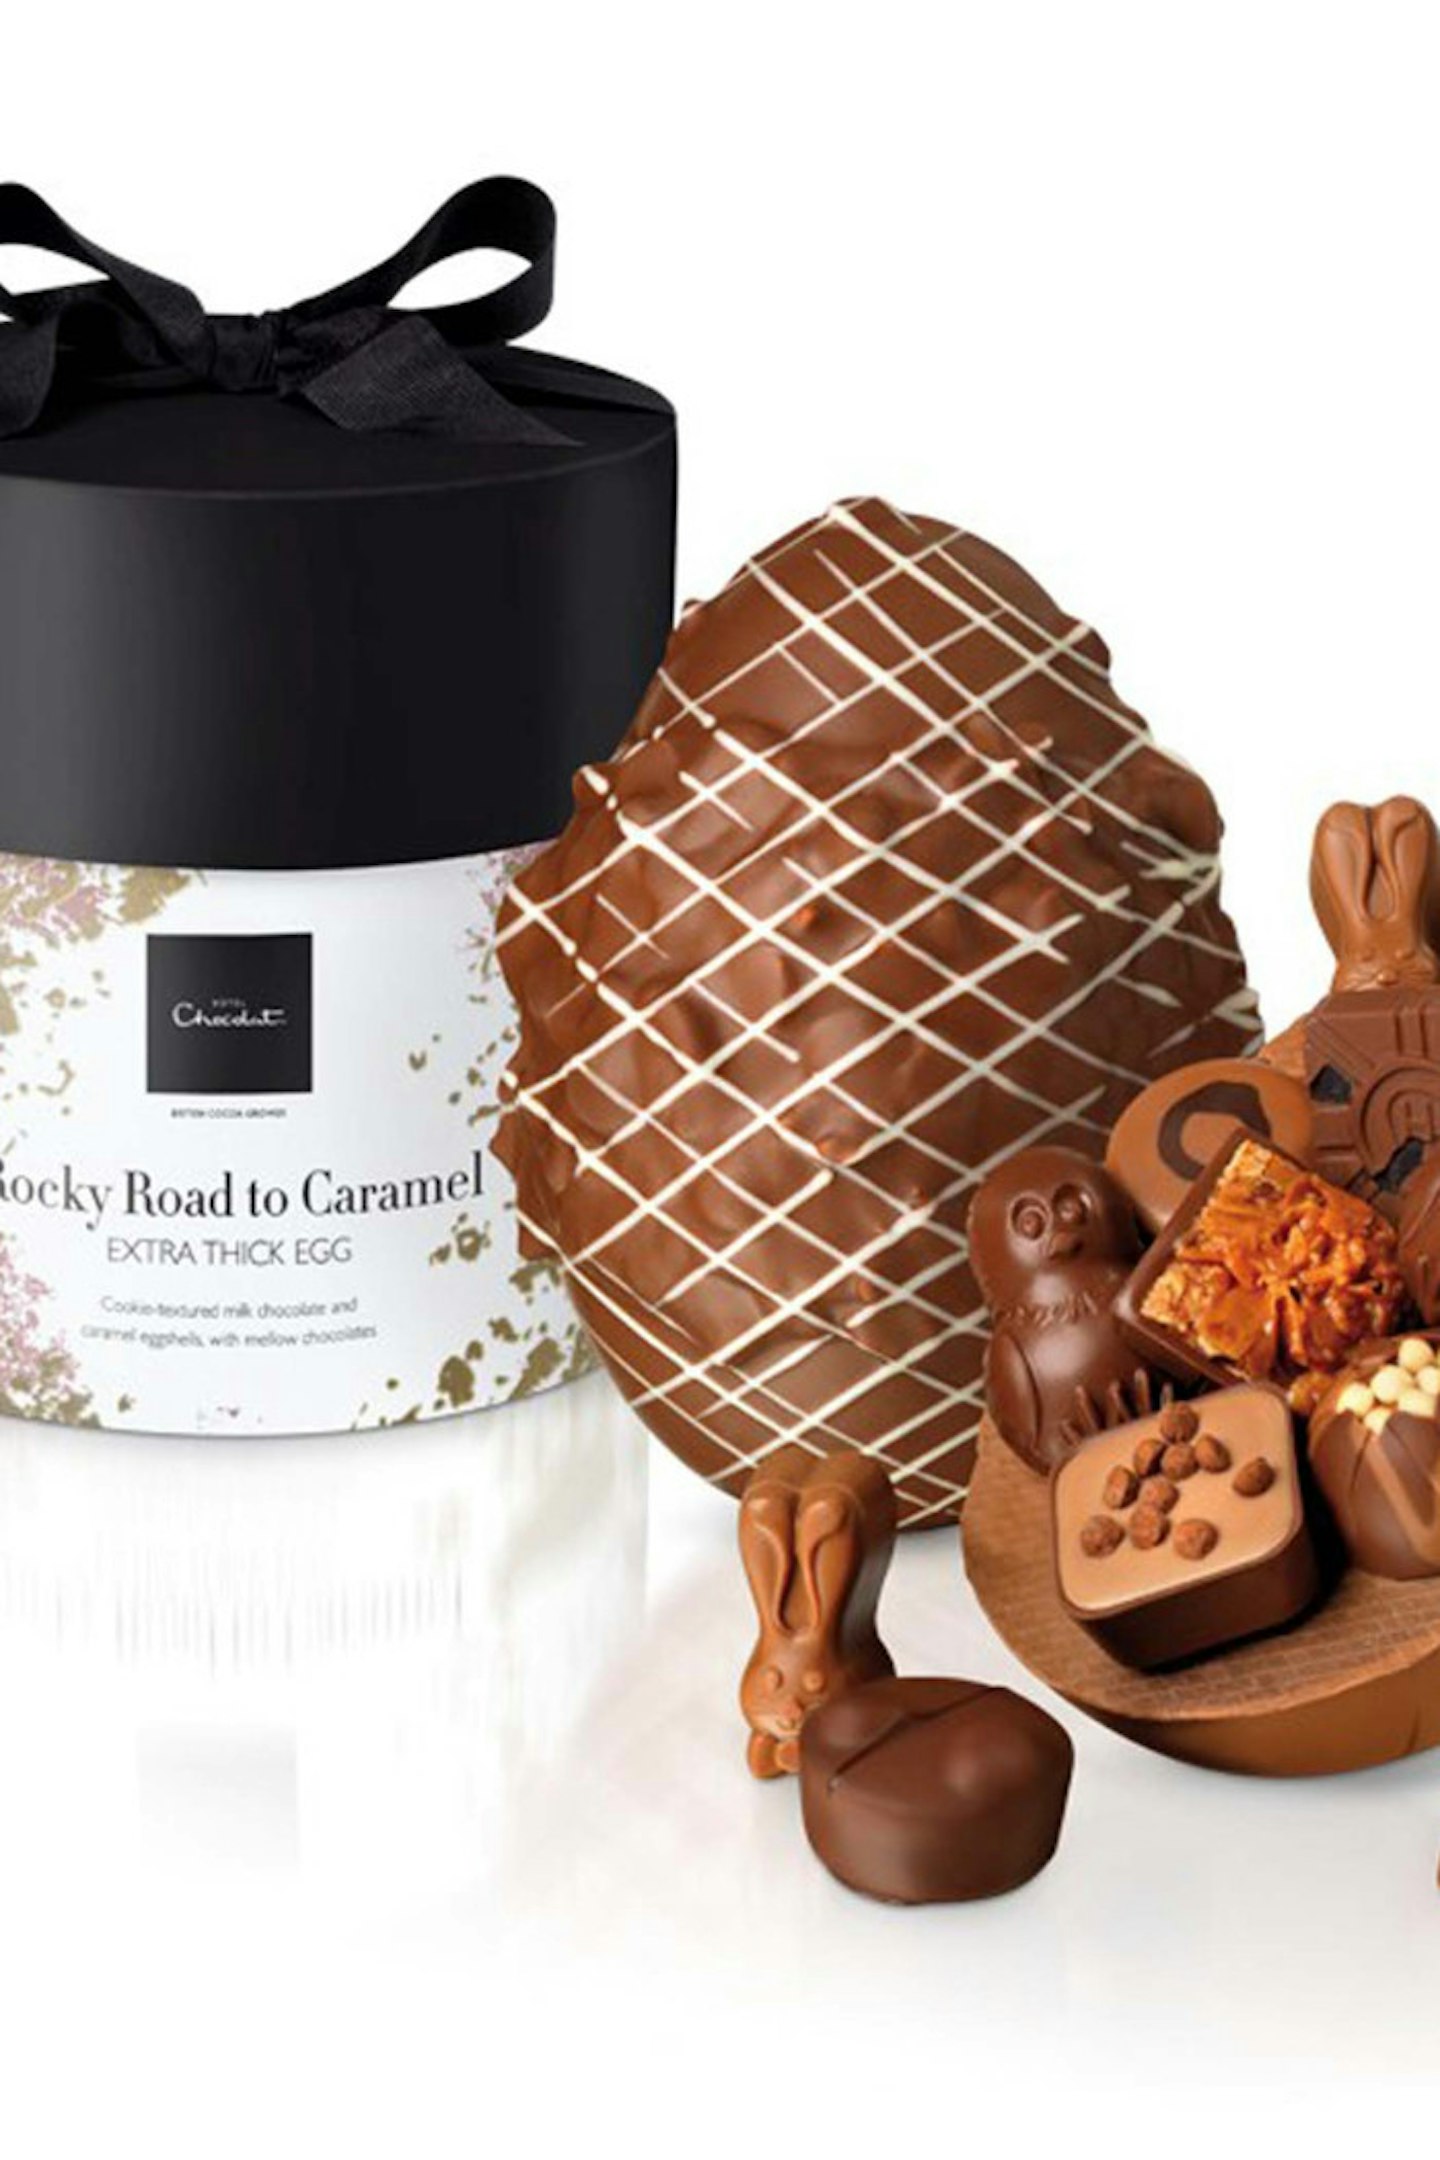 Rocky Road Caramel Extra Thick Easter Egg 27.00 hotel choc